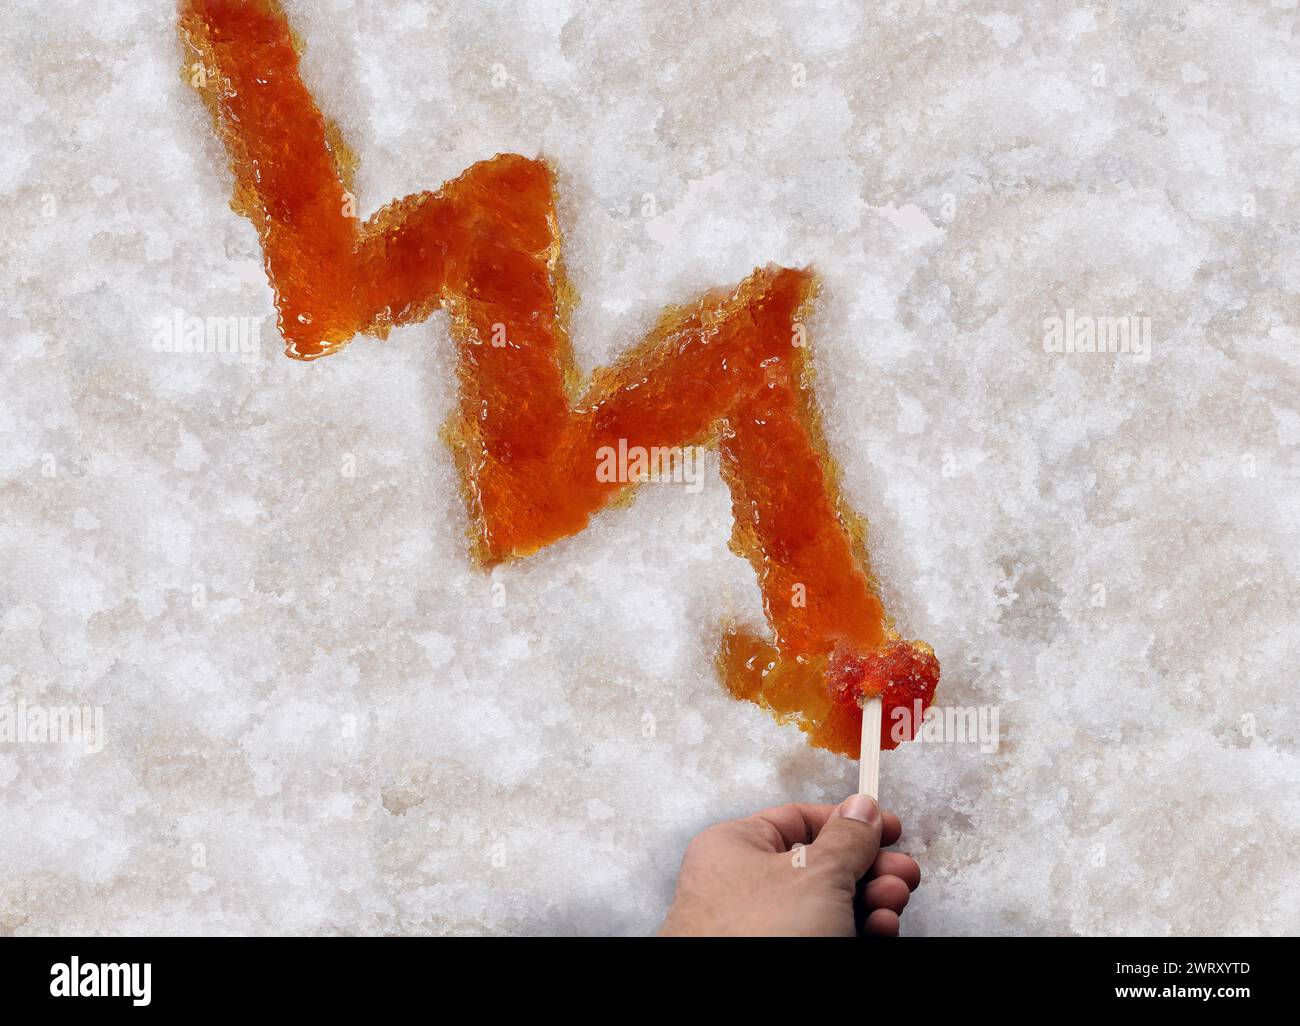 Maple syrup shortage and decline of Sugar Shack Maple taffy or sweet boiled tree sap as a downward chart arrow on snow as a traditional spring season Stock Photo